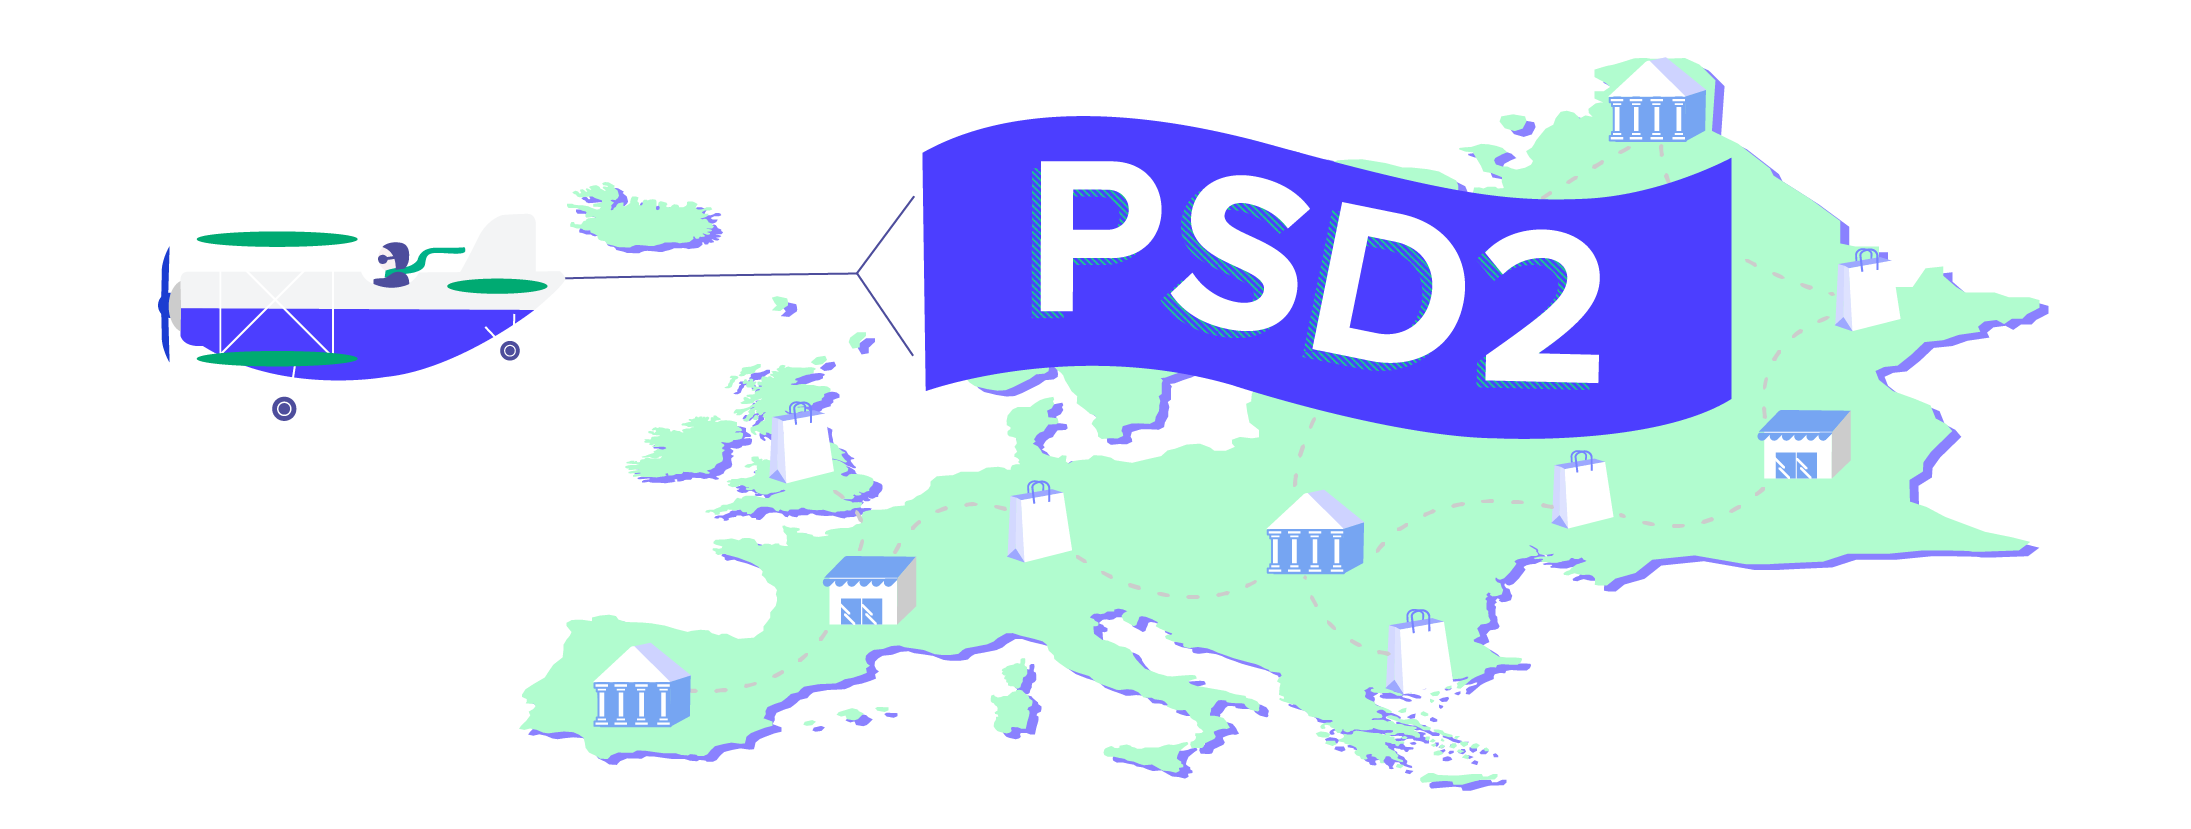 3 Ways to Maintain Control of Customer Experience Under PSD2